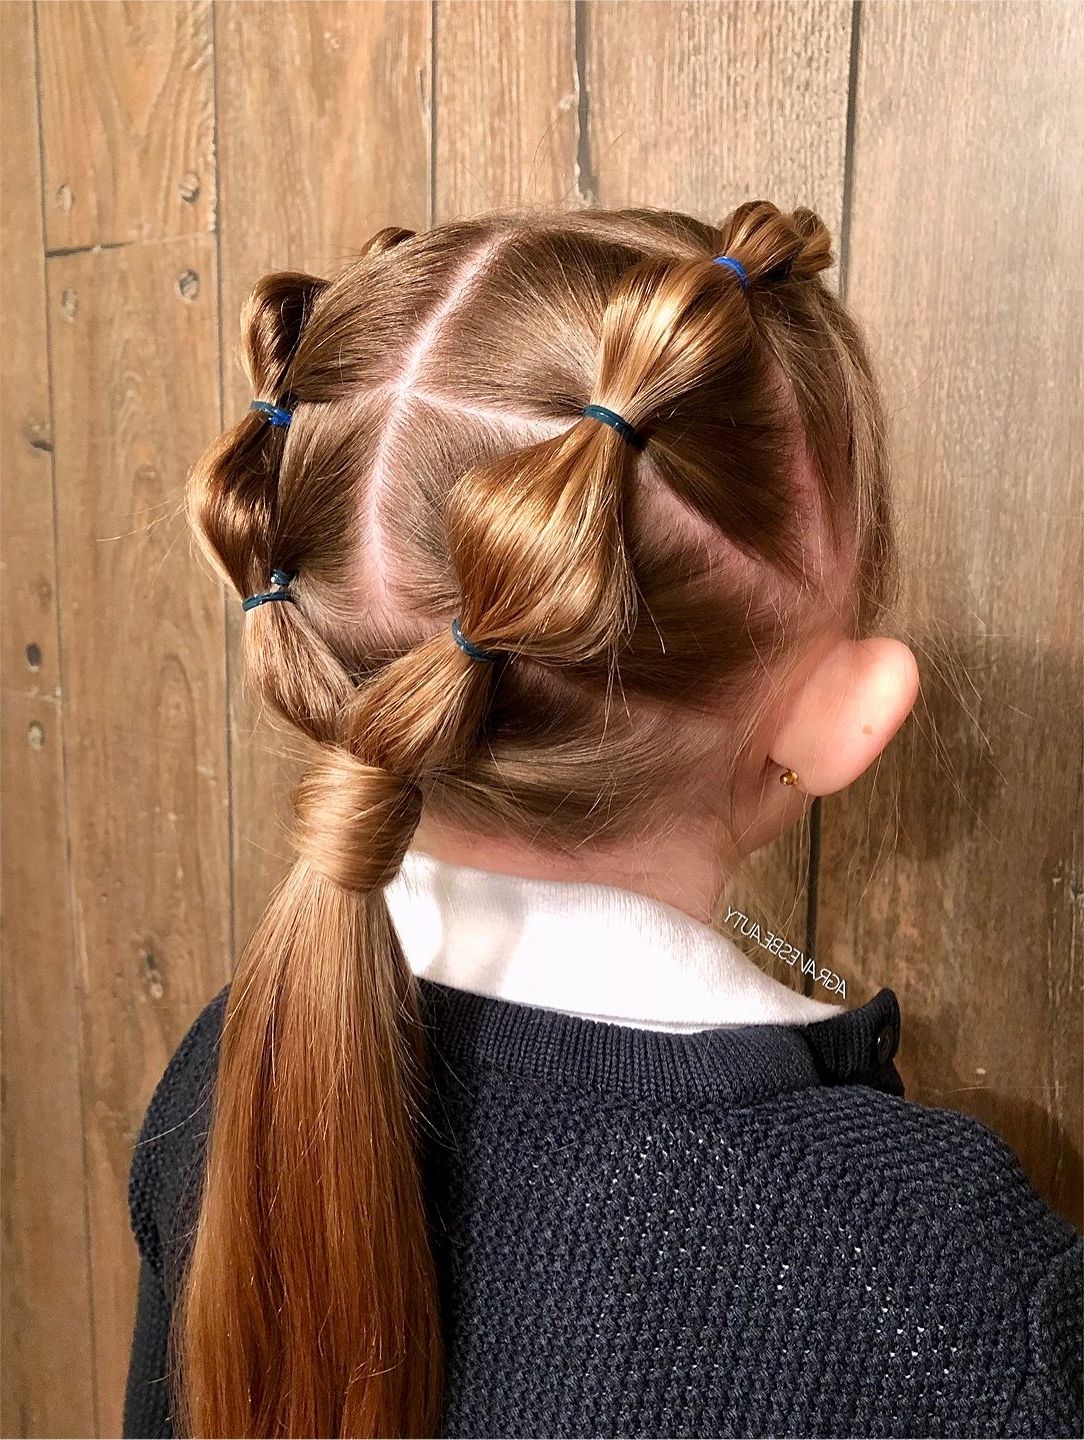 Trendy French Braid Hairstyles With Bubbles Intended For Keeping It Nice And Easy With Some Bubble Braids! (View 7 of 15)